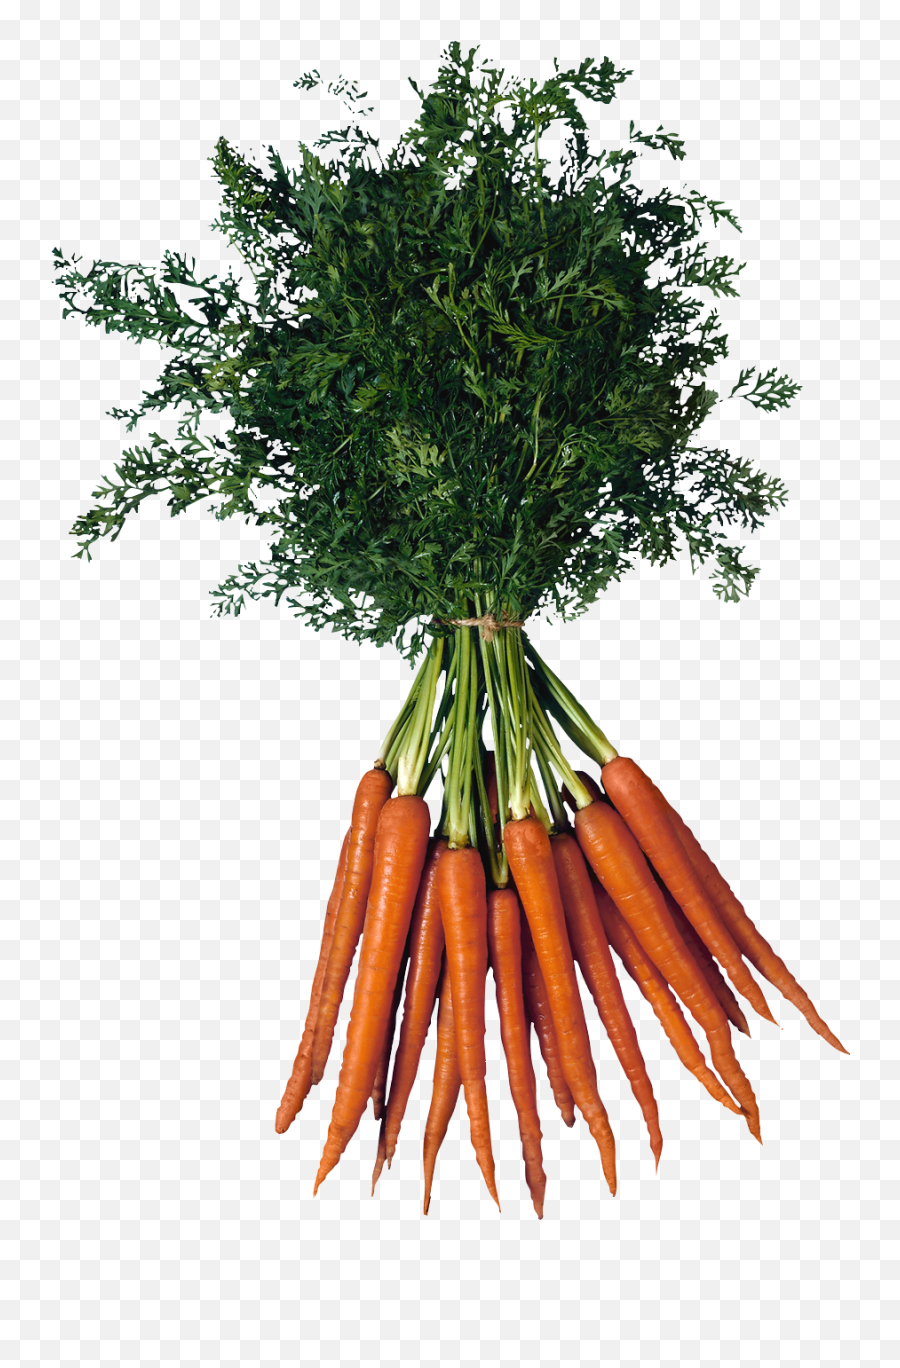 Carrot Transparent Png Image - Bunch Of Carrots Transparent,Carrot Transparent Background